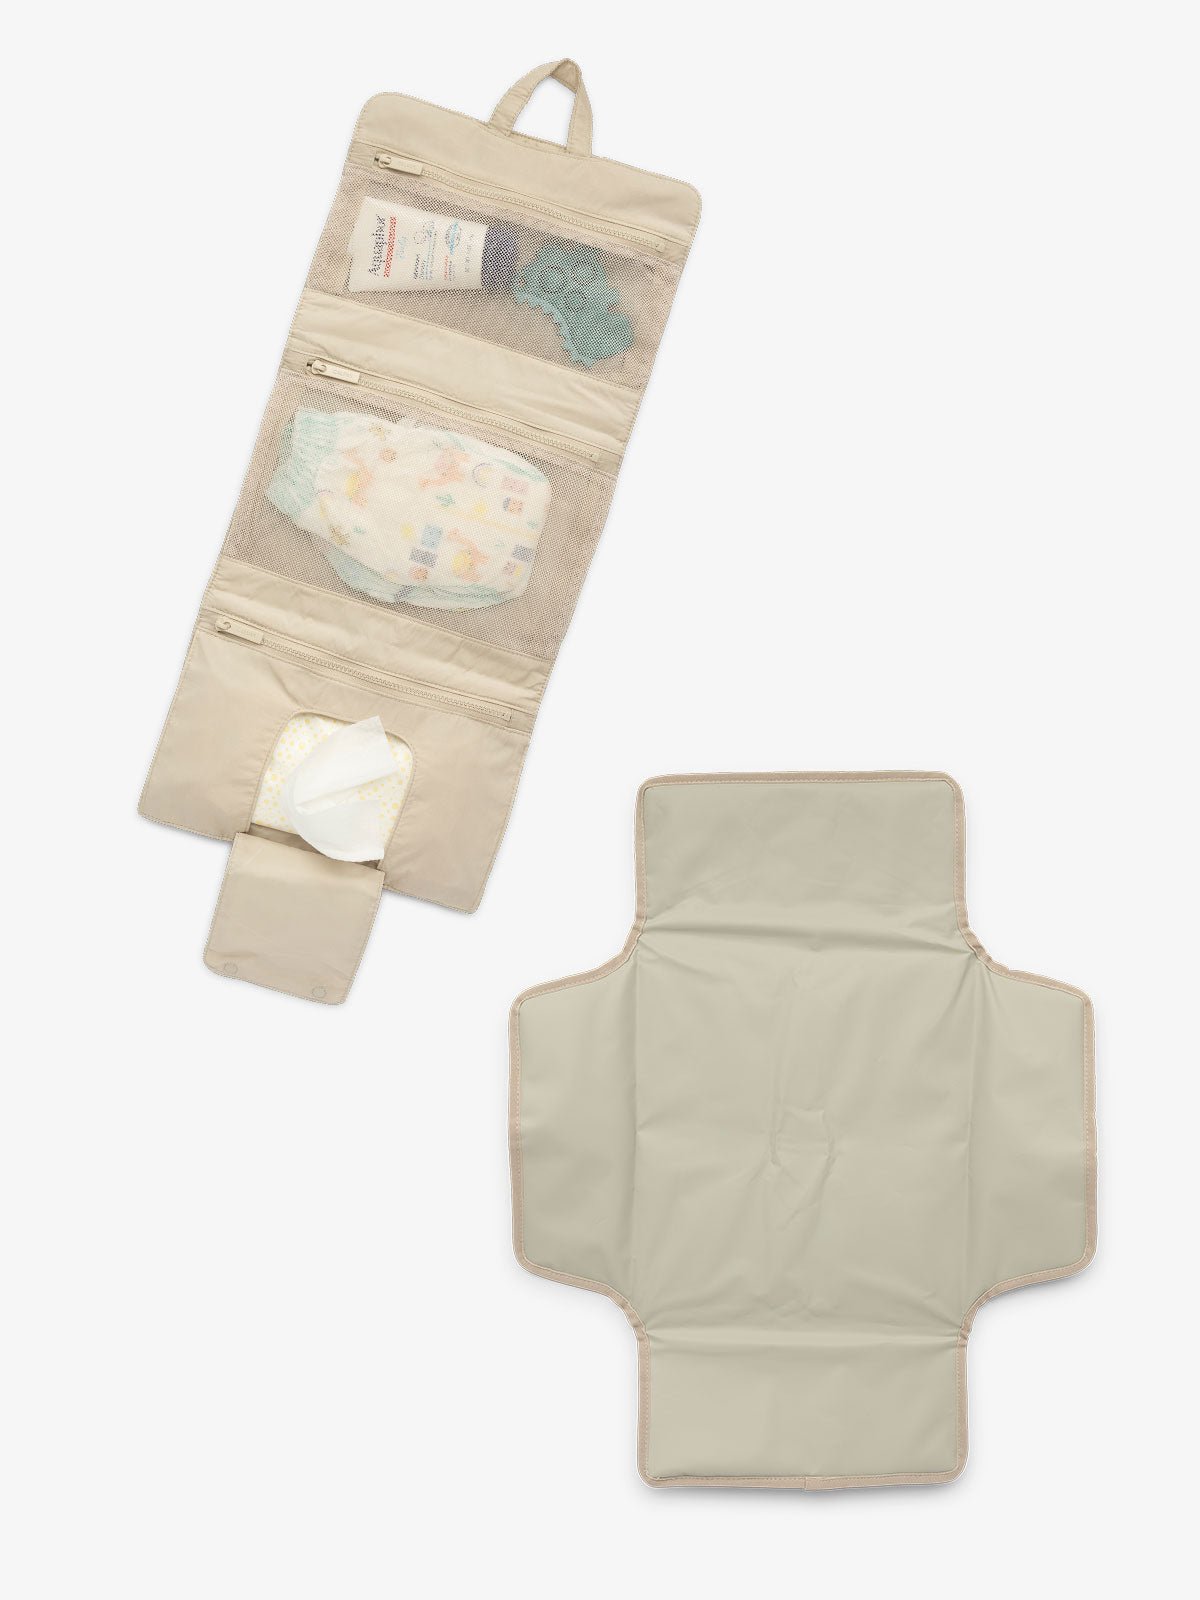 CALPAK portable changing pad includes multiple pockets, collapsing hanging hook, and detachable changing pad in beige